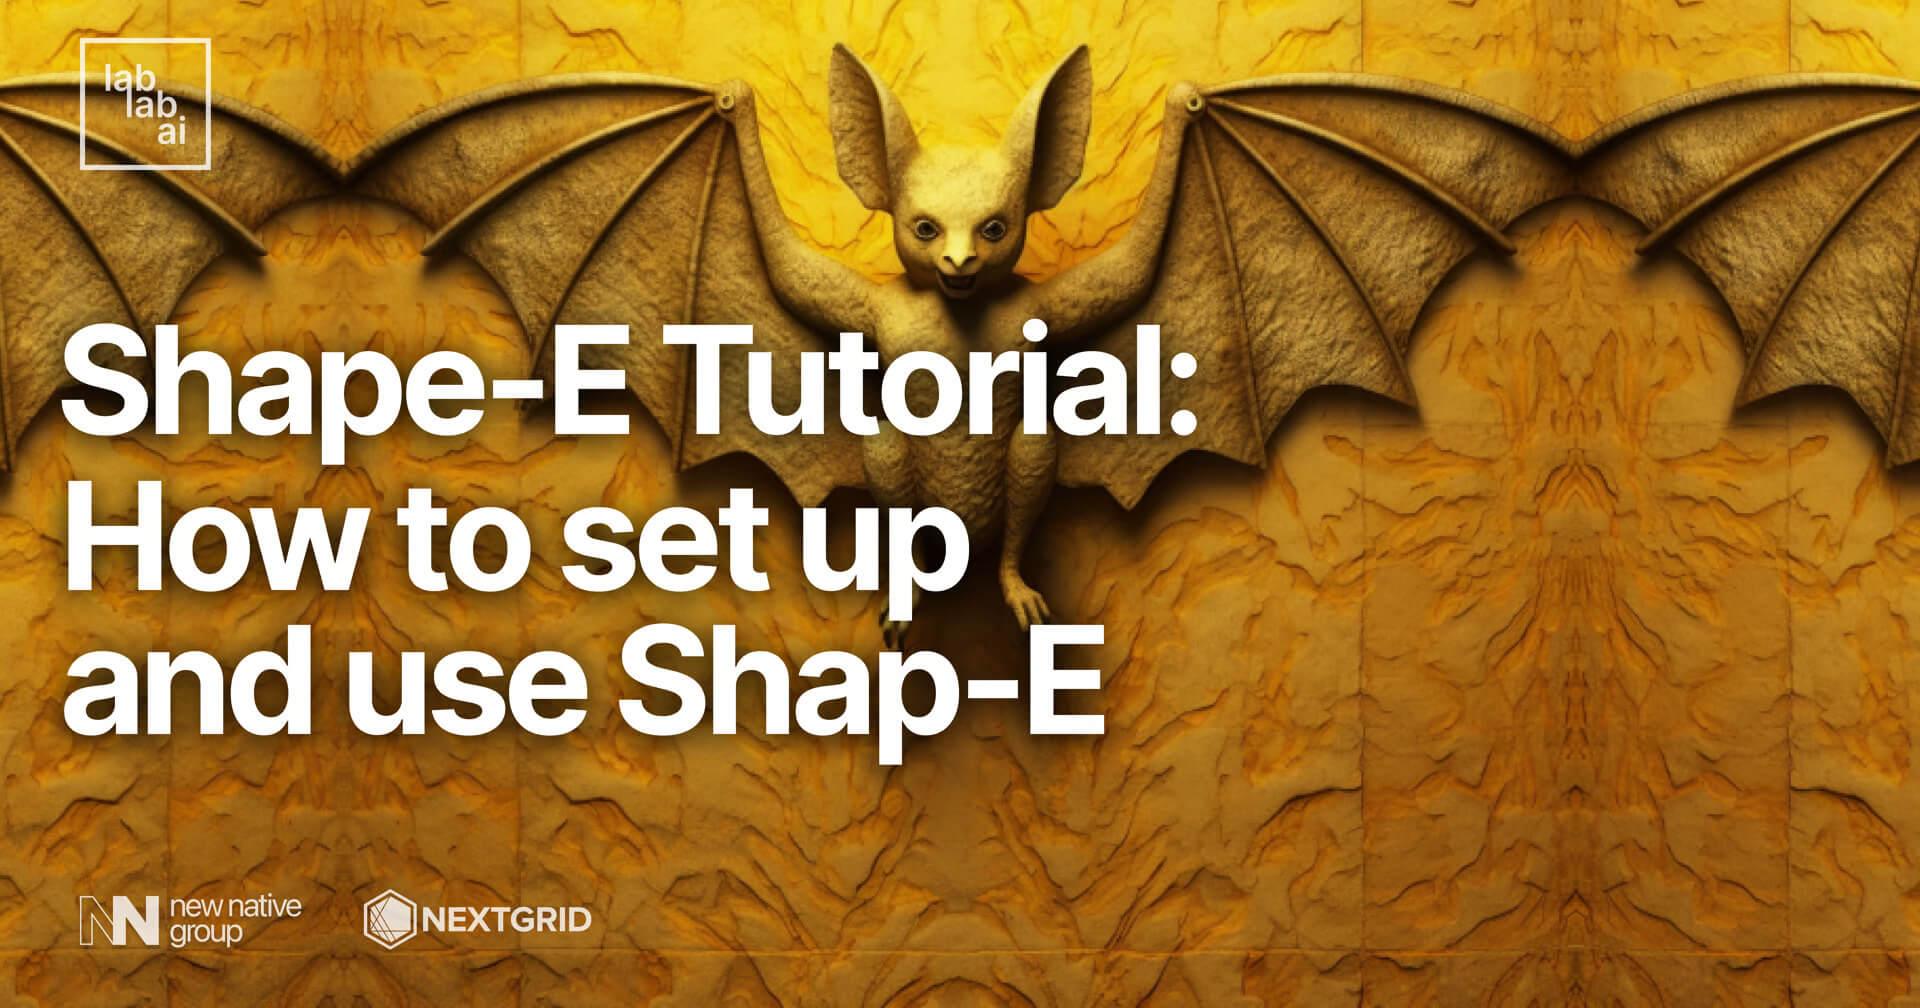 Shap-E Tutorial: how to set up and use Shap-E model